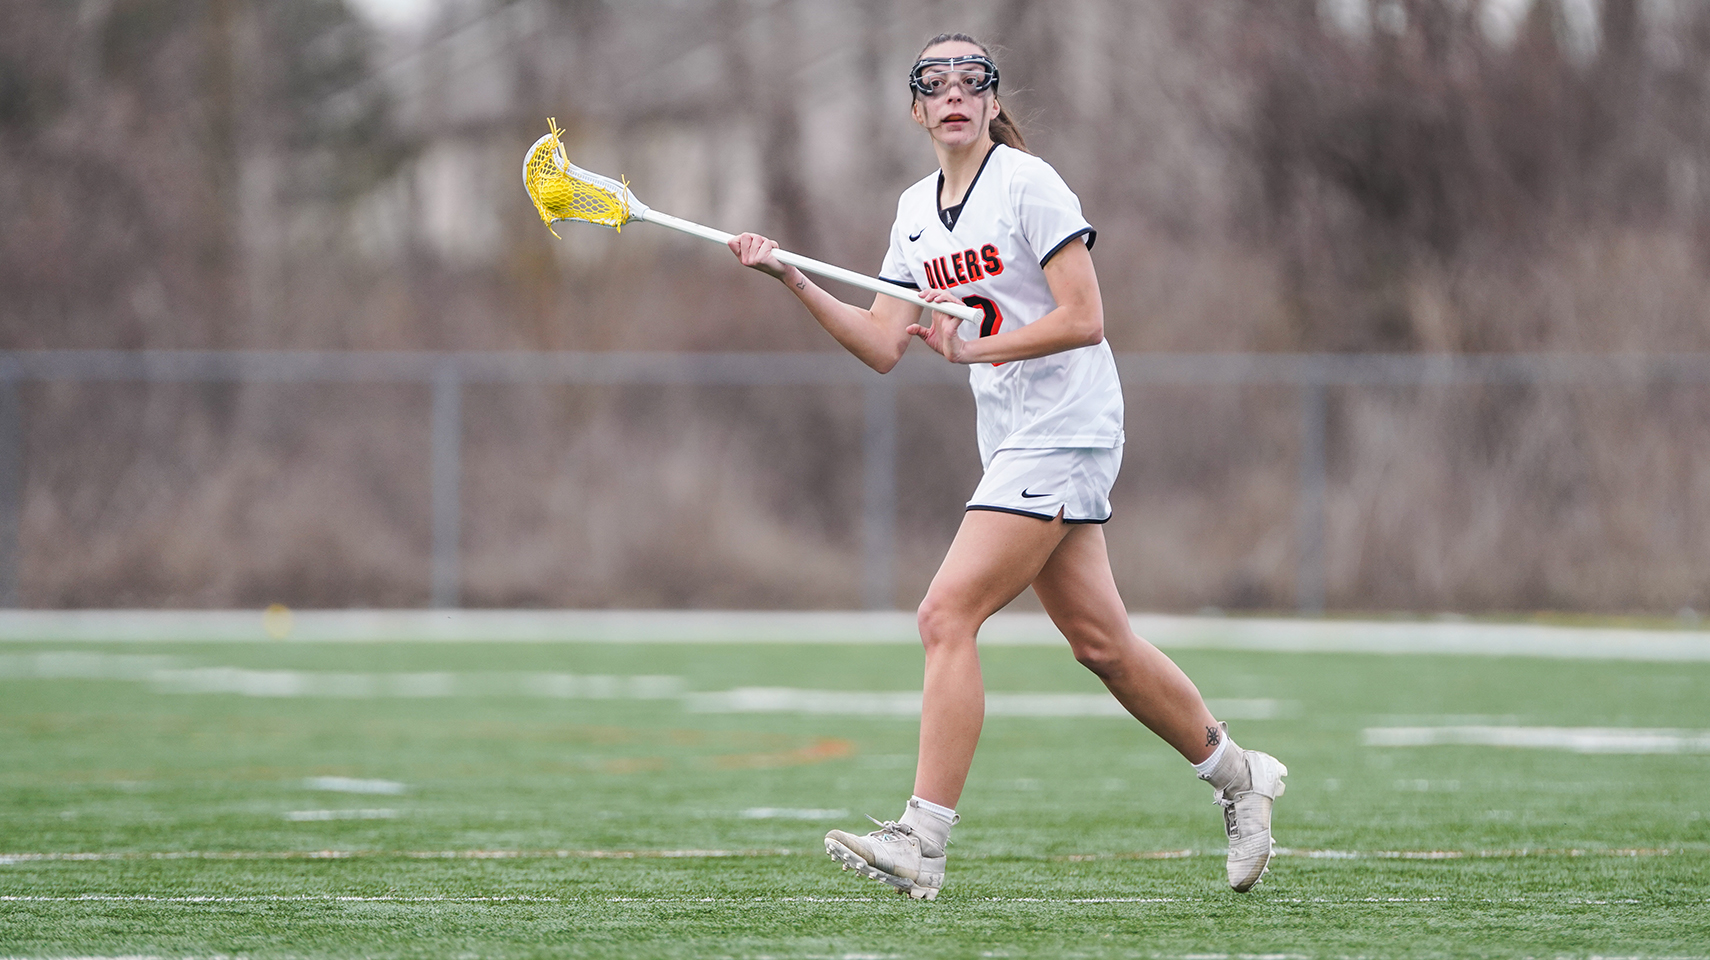 Women's lacrosse player in white uniform holding the ball.